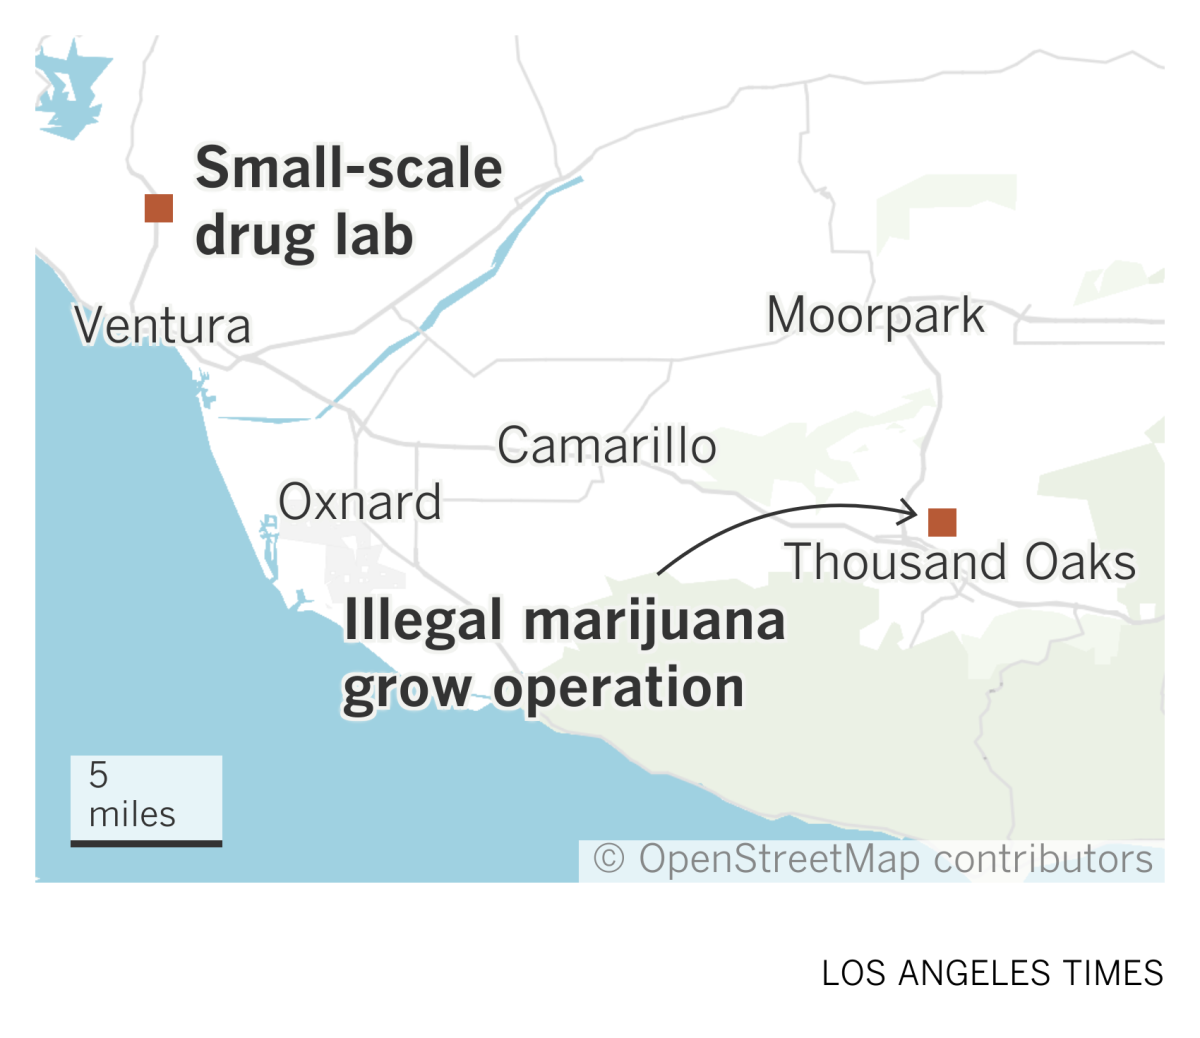 A map of Ventura County shows the locations of a drug lab near Ventura and a marijuana grow operation in Thousand Oaks